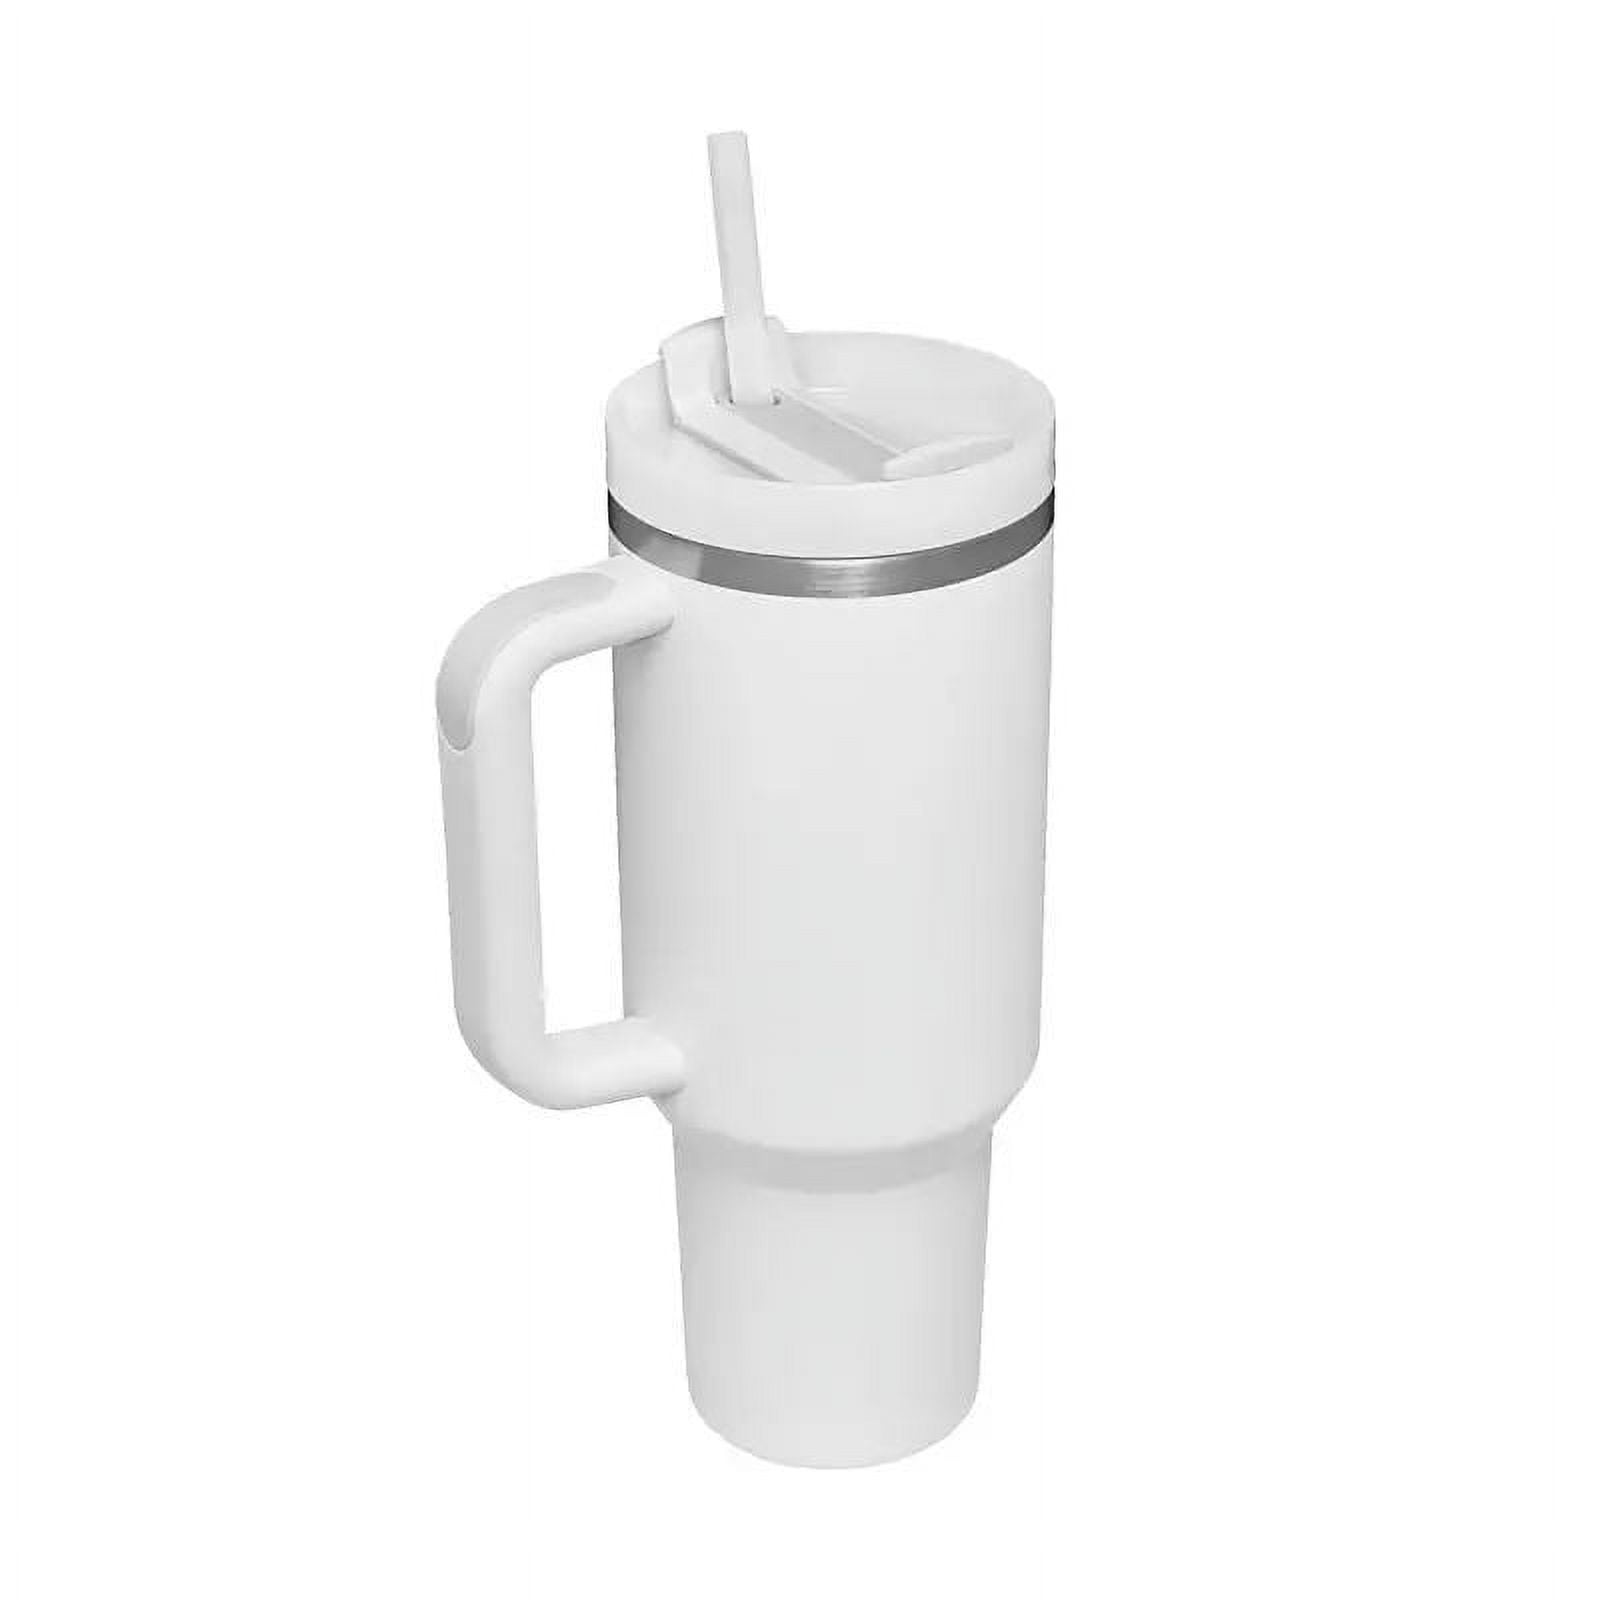 1pc, Stanly Cup With Lid And Straw, 40oz/1200ml Heavy Duty Water Cup,  Stainless Steel Tumbler, Vacuum Coffee Cups, Drinking Cups, Summer  Drinkware, Home Kitchen Items, Birthday Gifts 